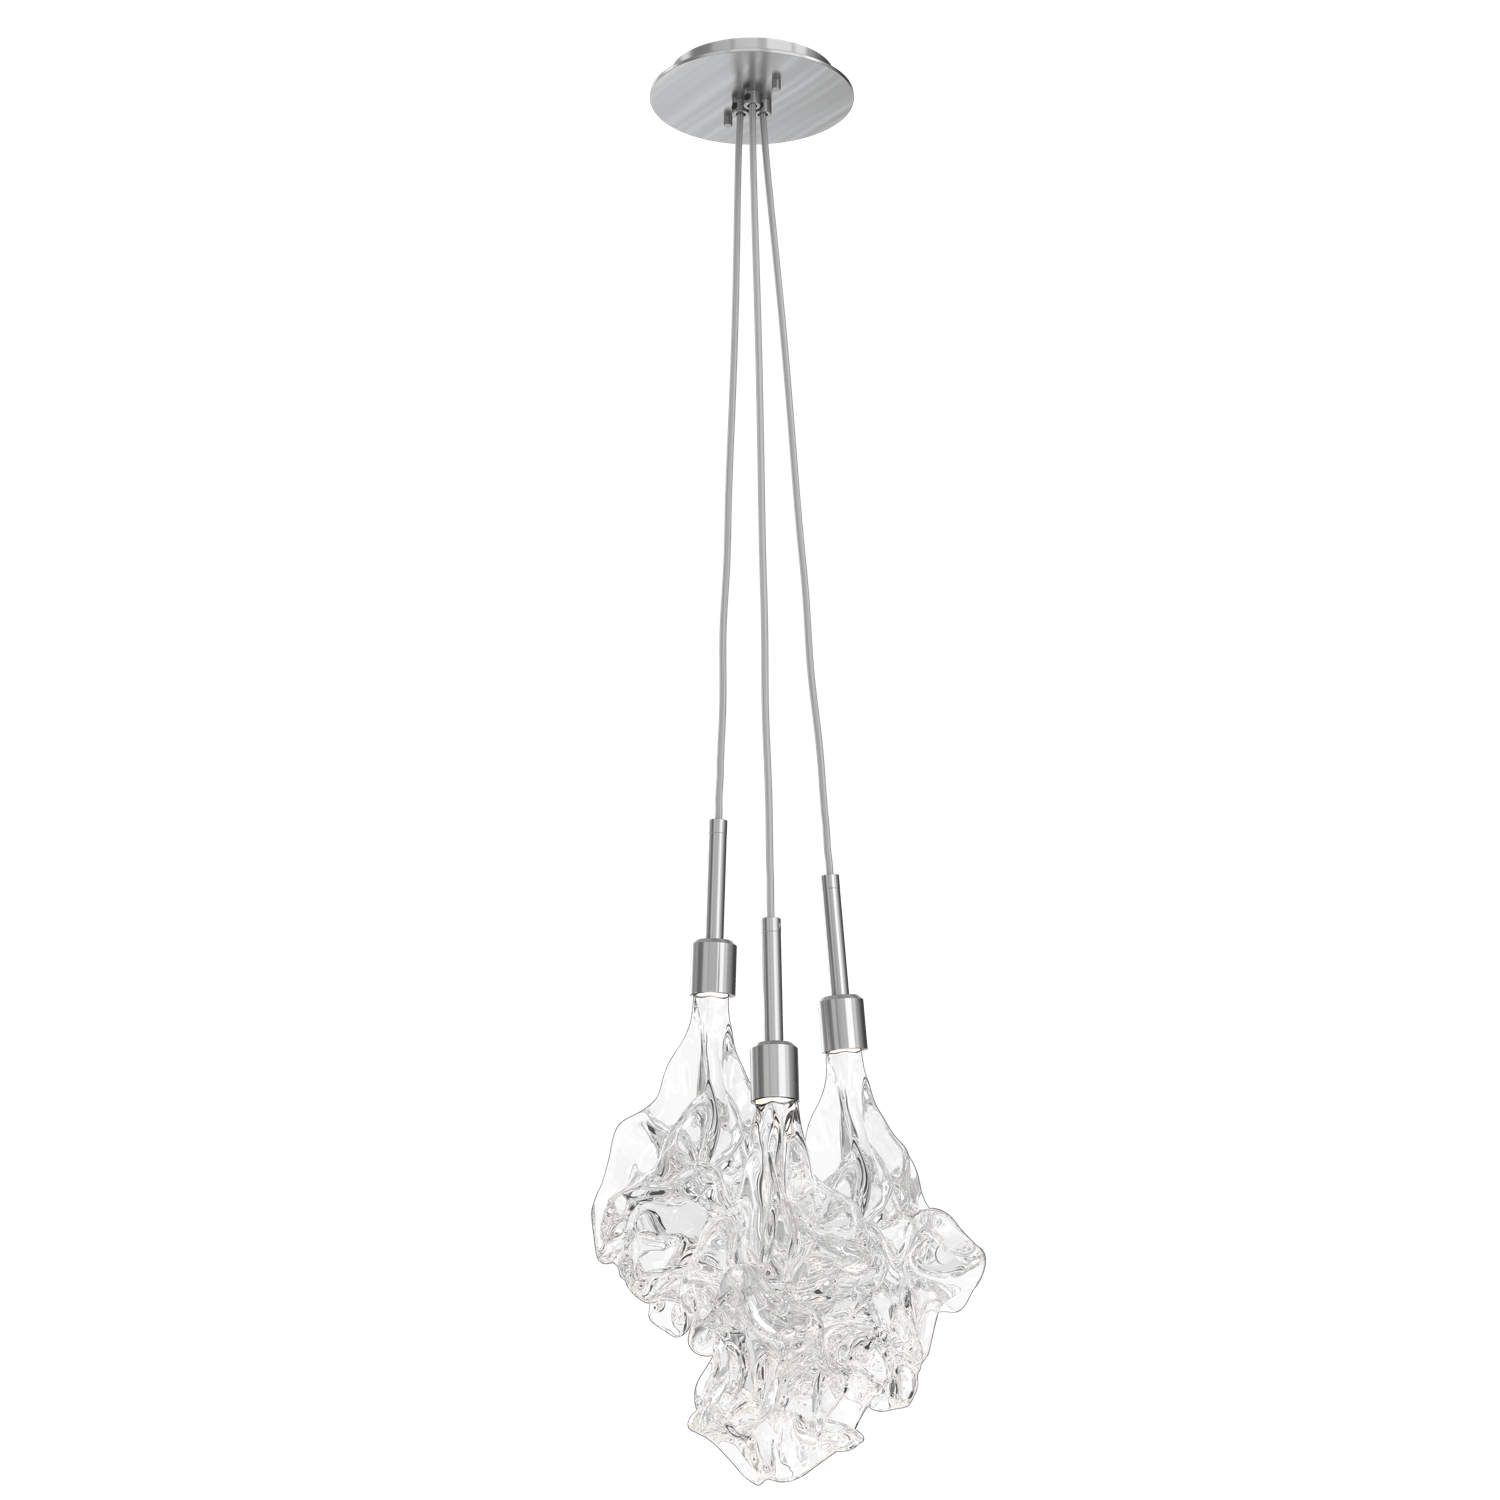 LAB0059-0A-SN-Hammerton-Studio-Blossom-3-light-cluster-pendant-light-with-satin-nickel-finish-and-clear-handblown-crystal-glass-shades-and-LED-lamping